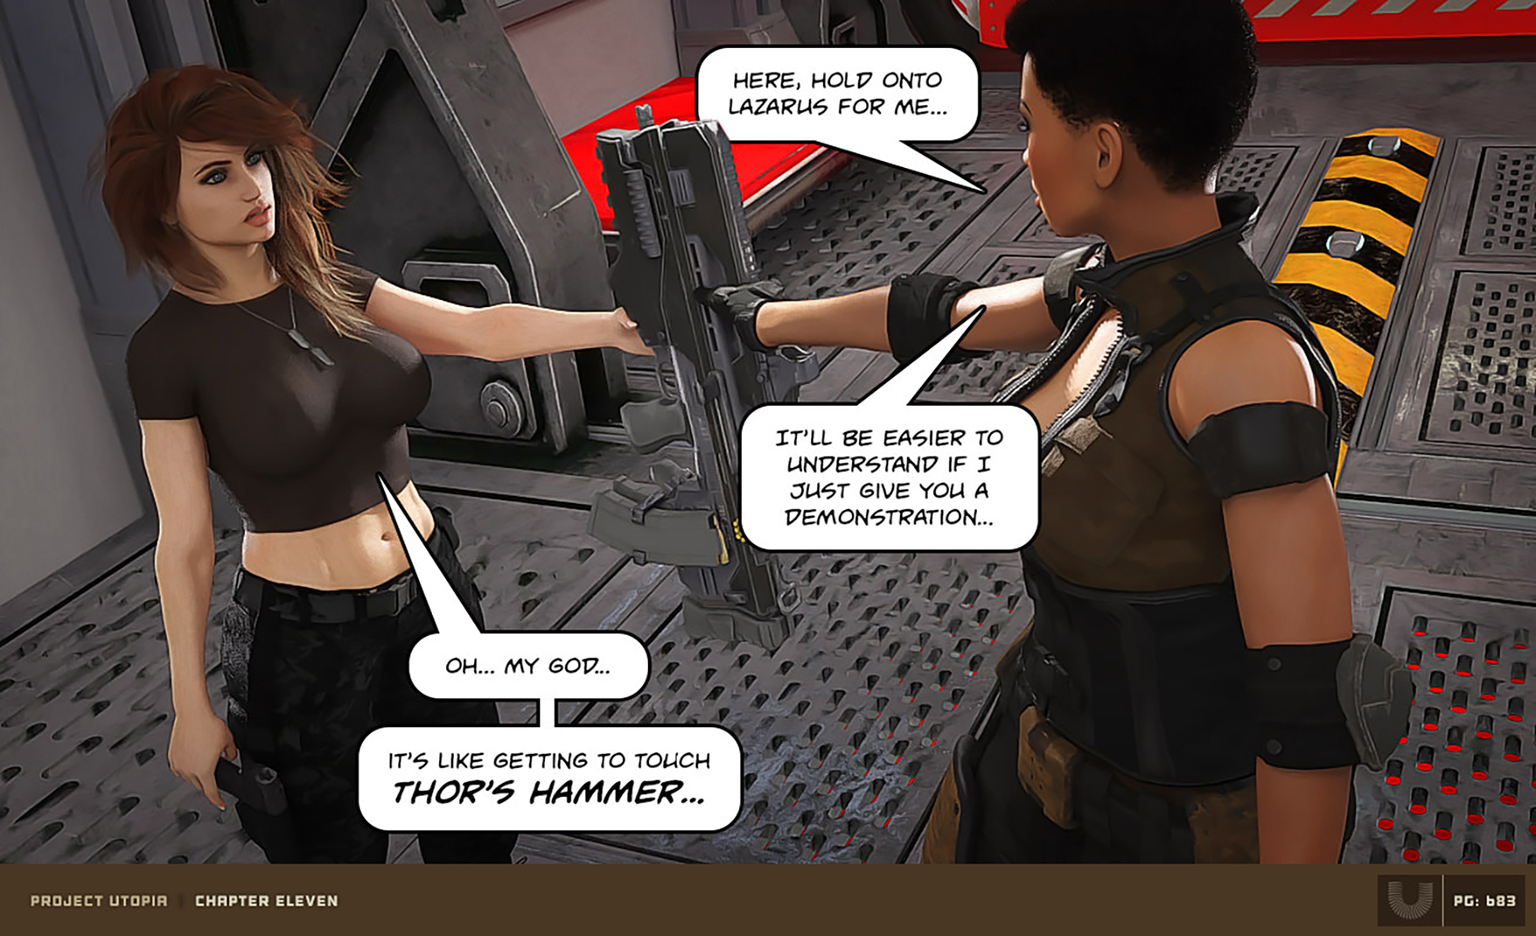 Project Utopia: Chapter 11 porn comic.